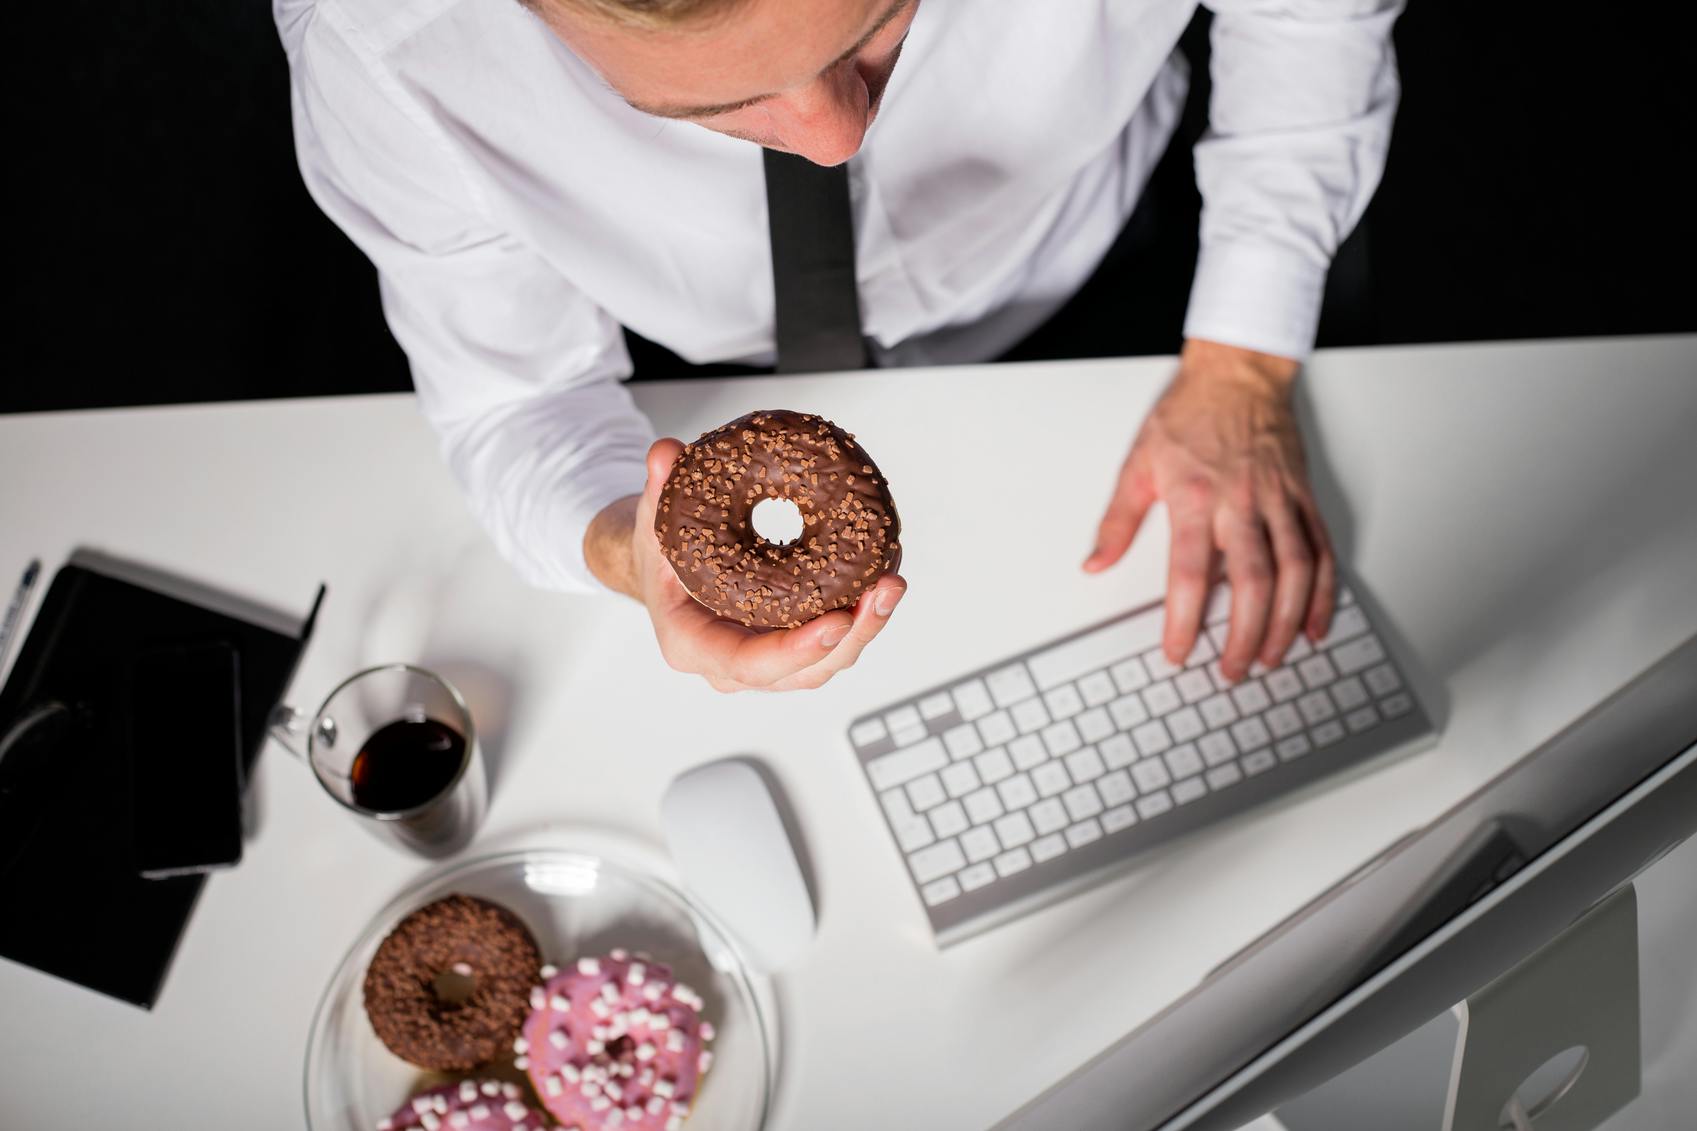 Cake culture could be slowly killing employees